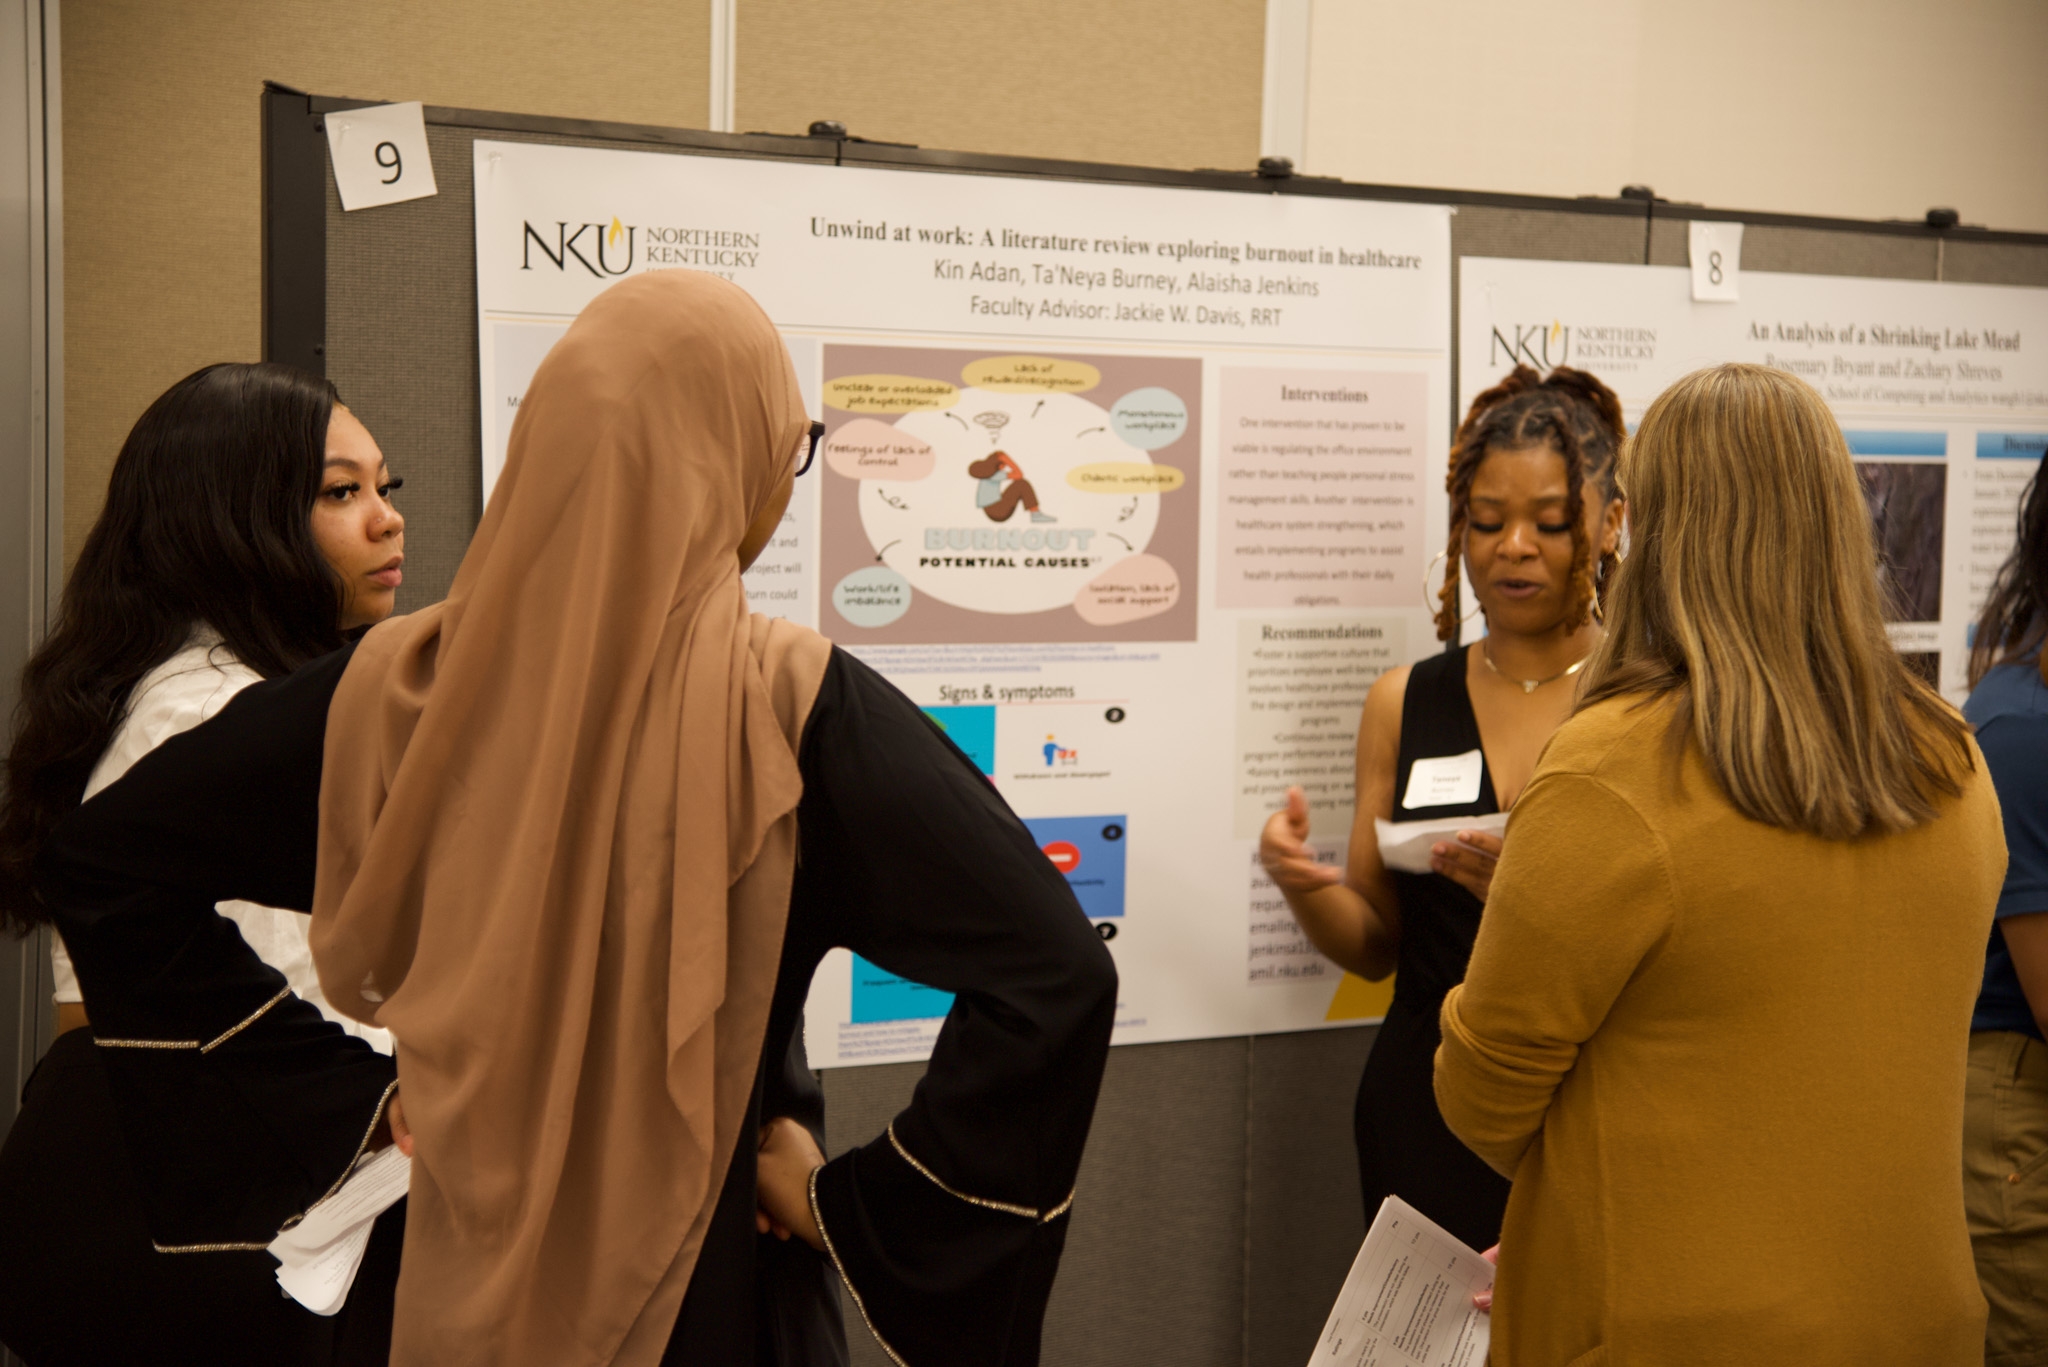 Students discuss their poster presentations